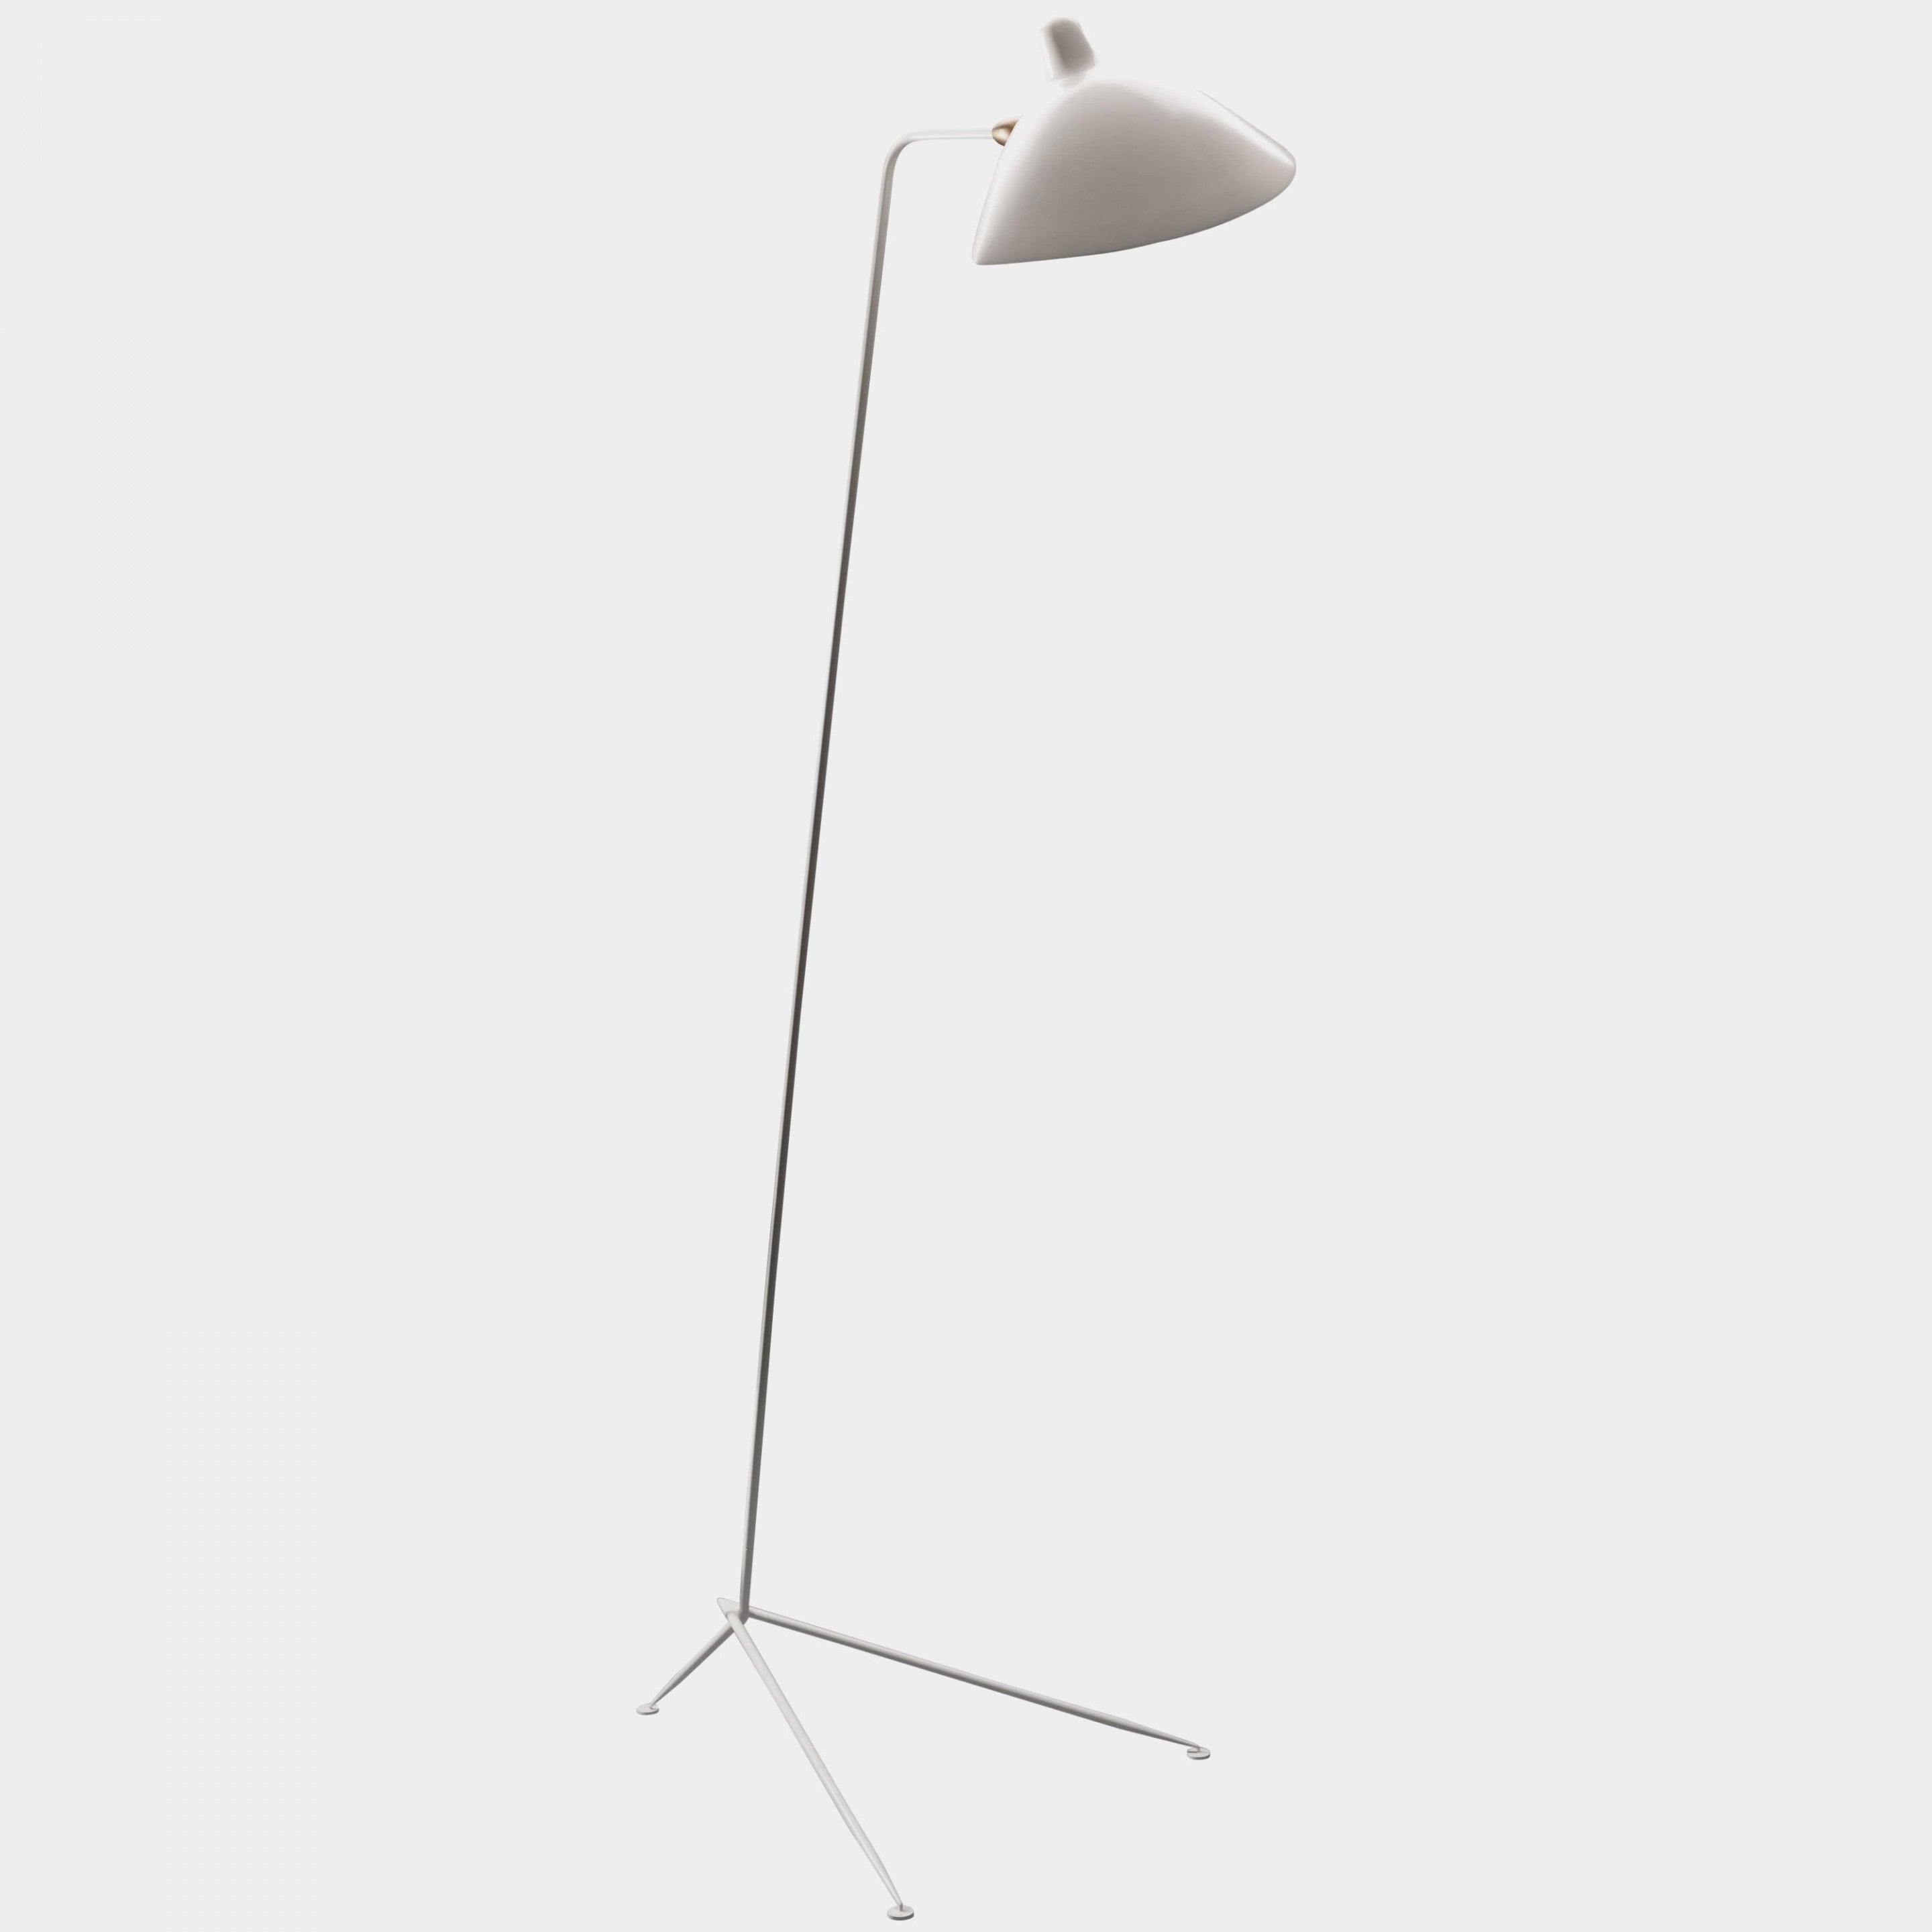 Standing lamp - The Design Part